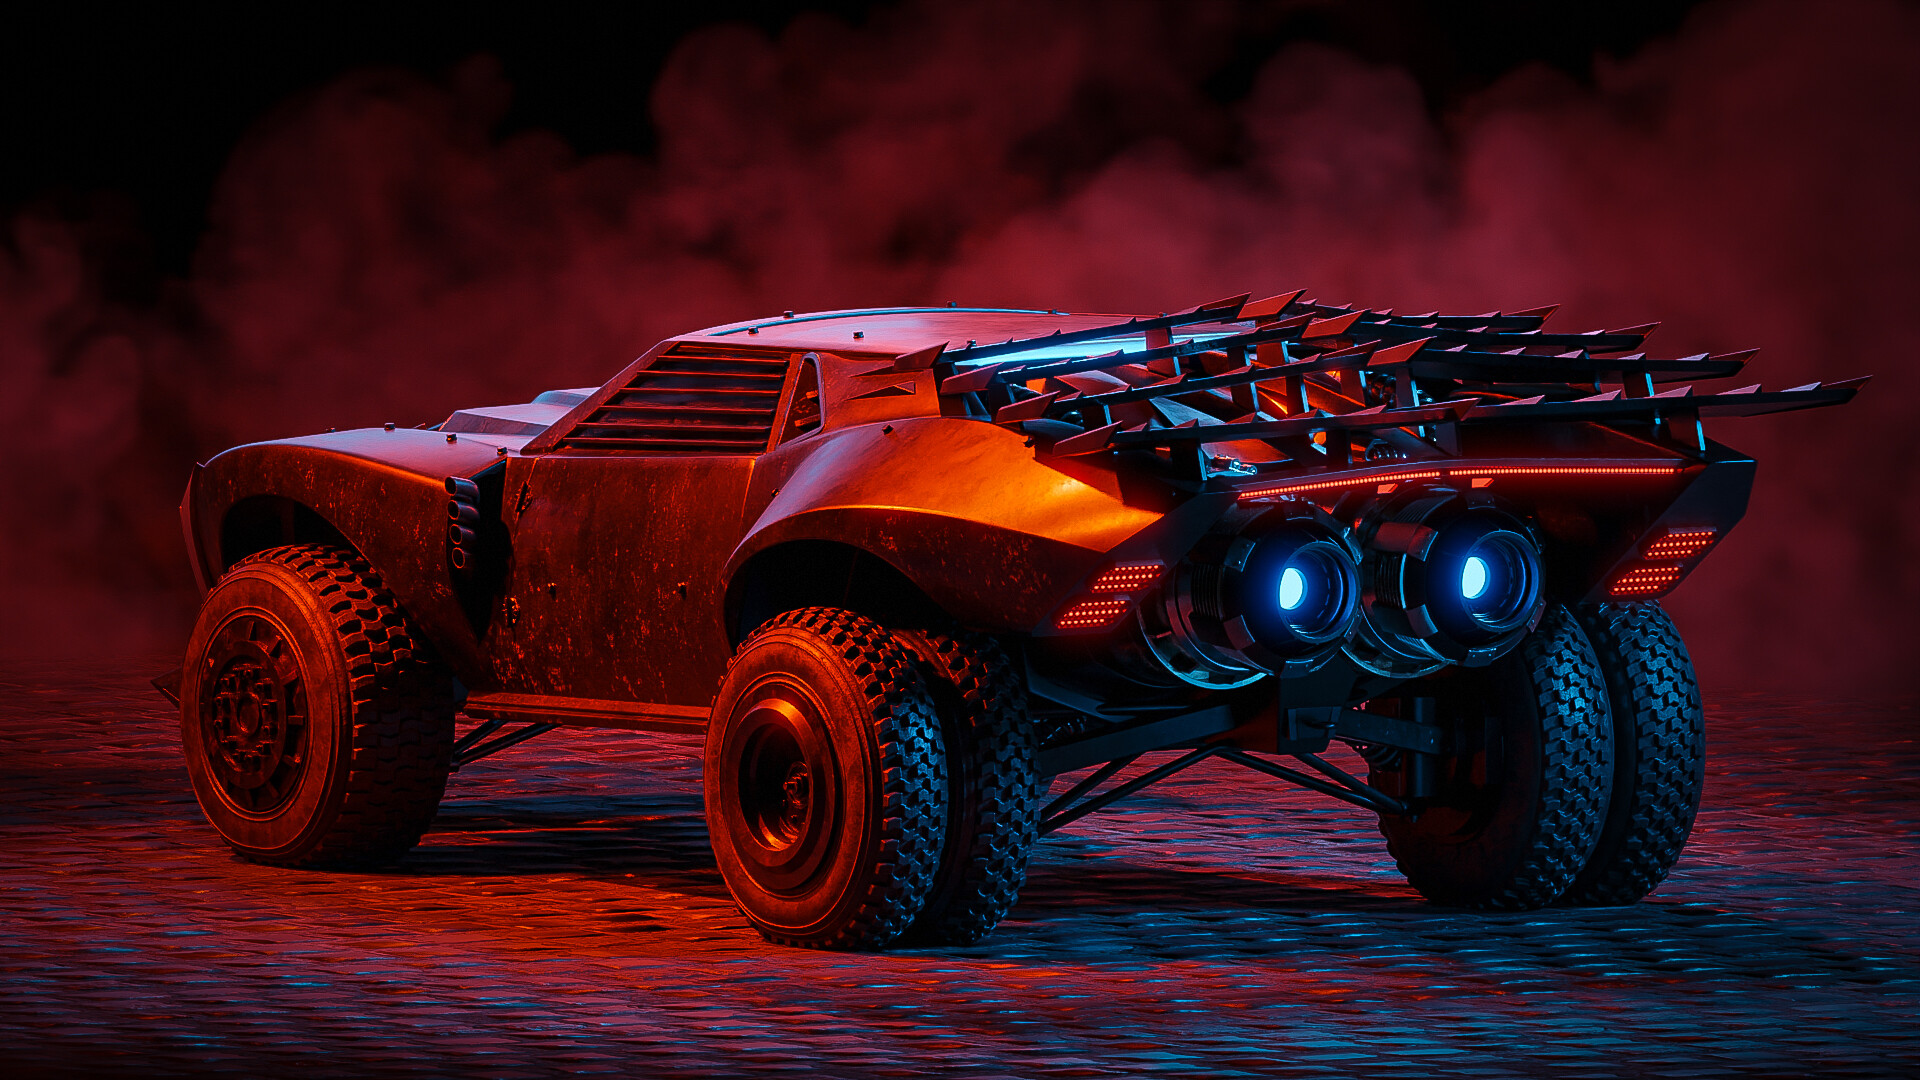 Batmobile Concept - Finished Projects - Blender Artists Community